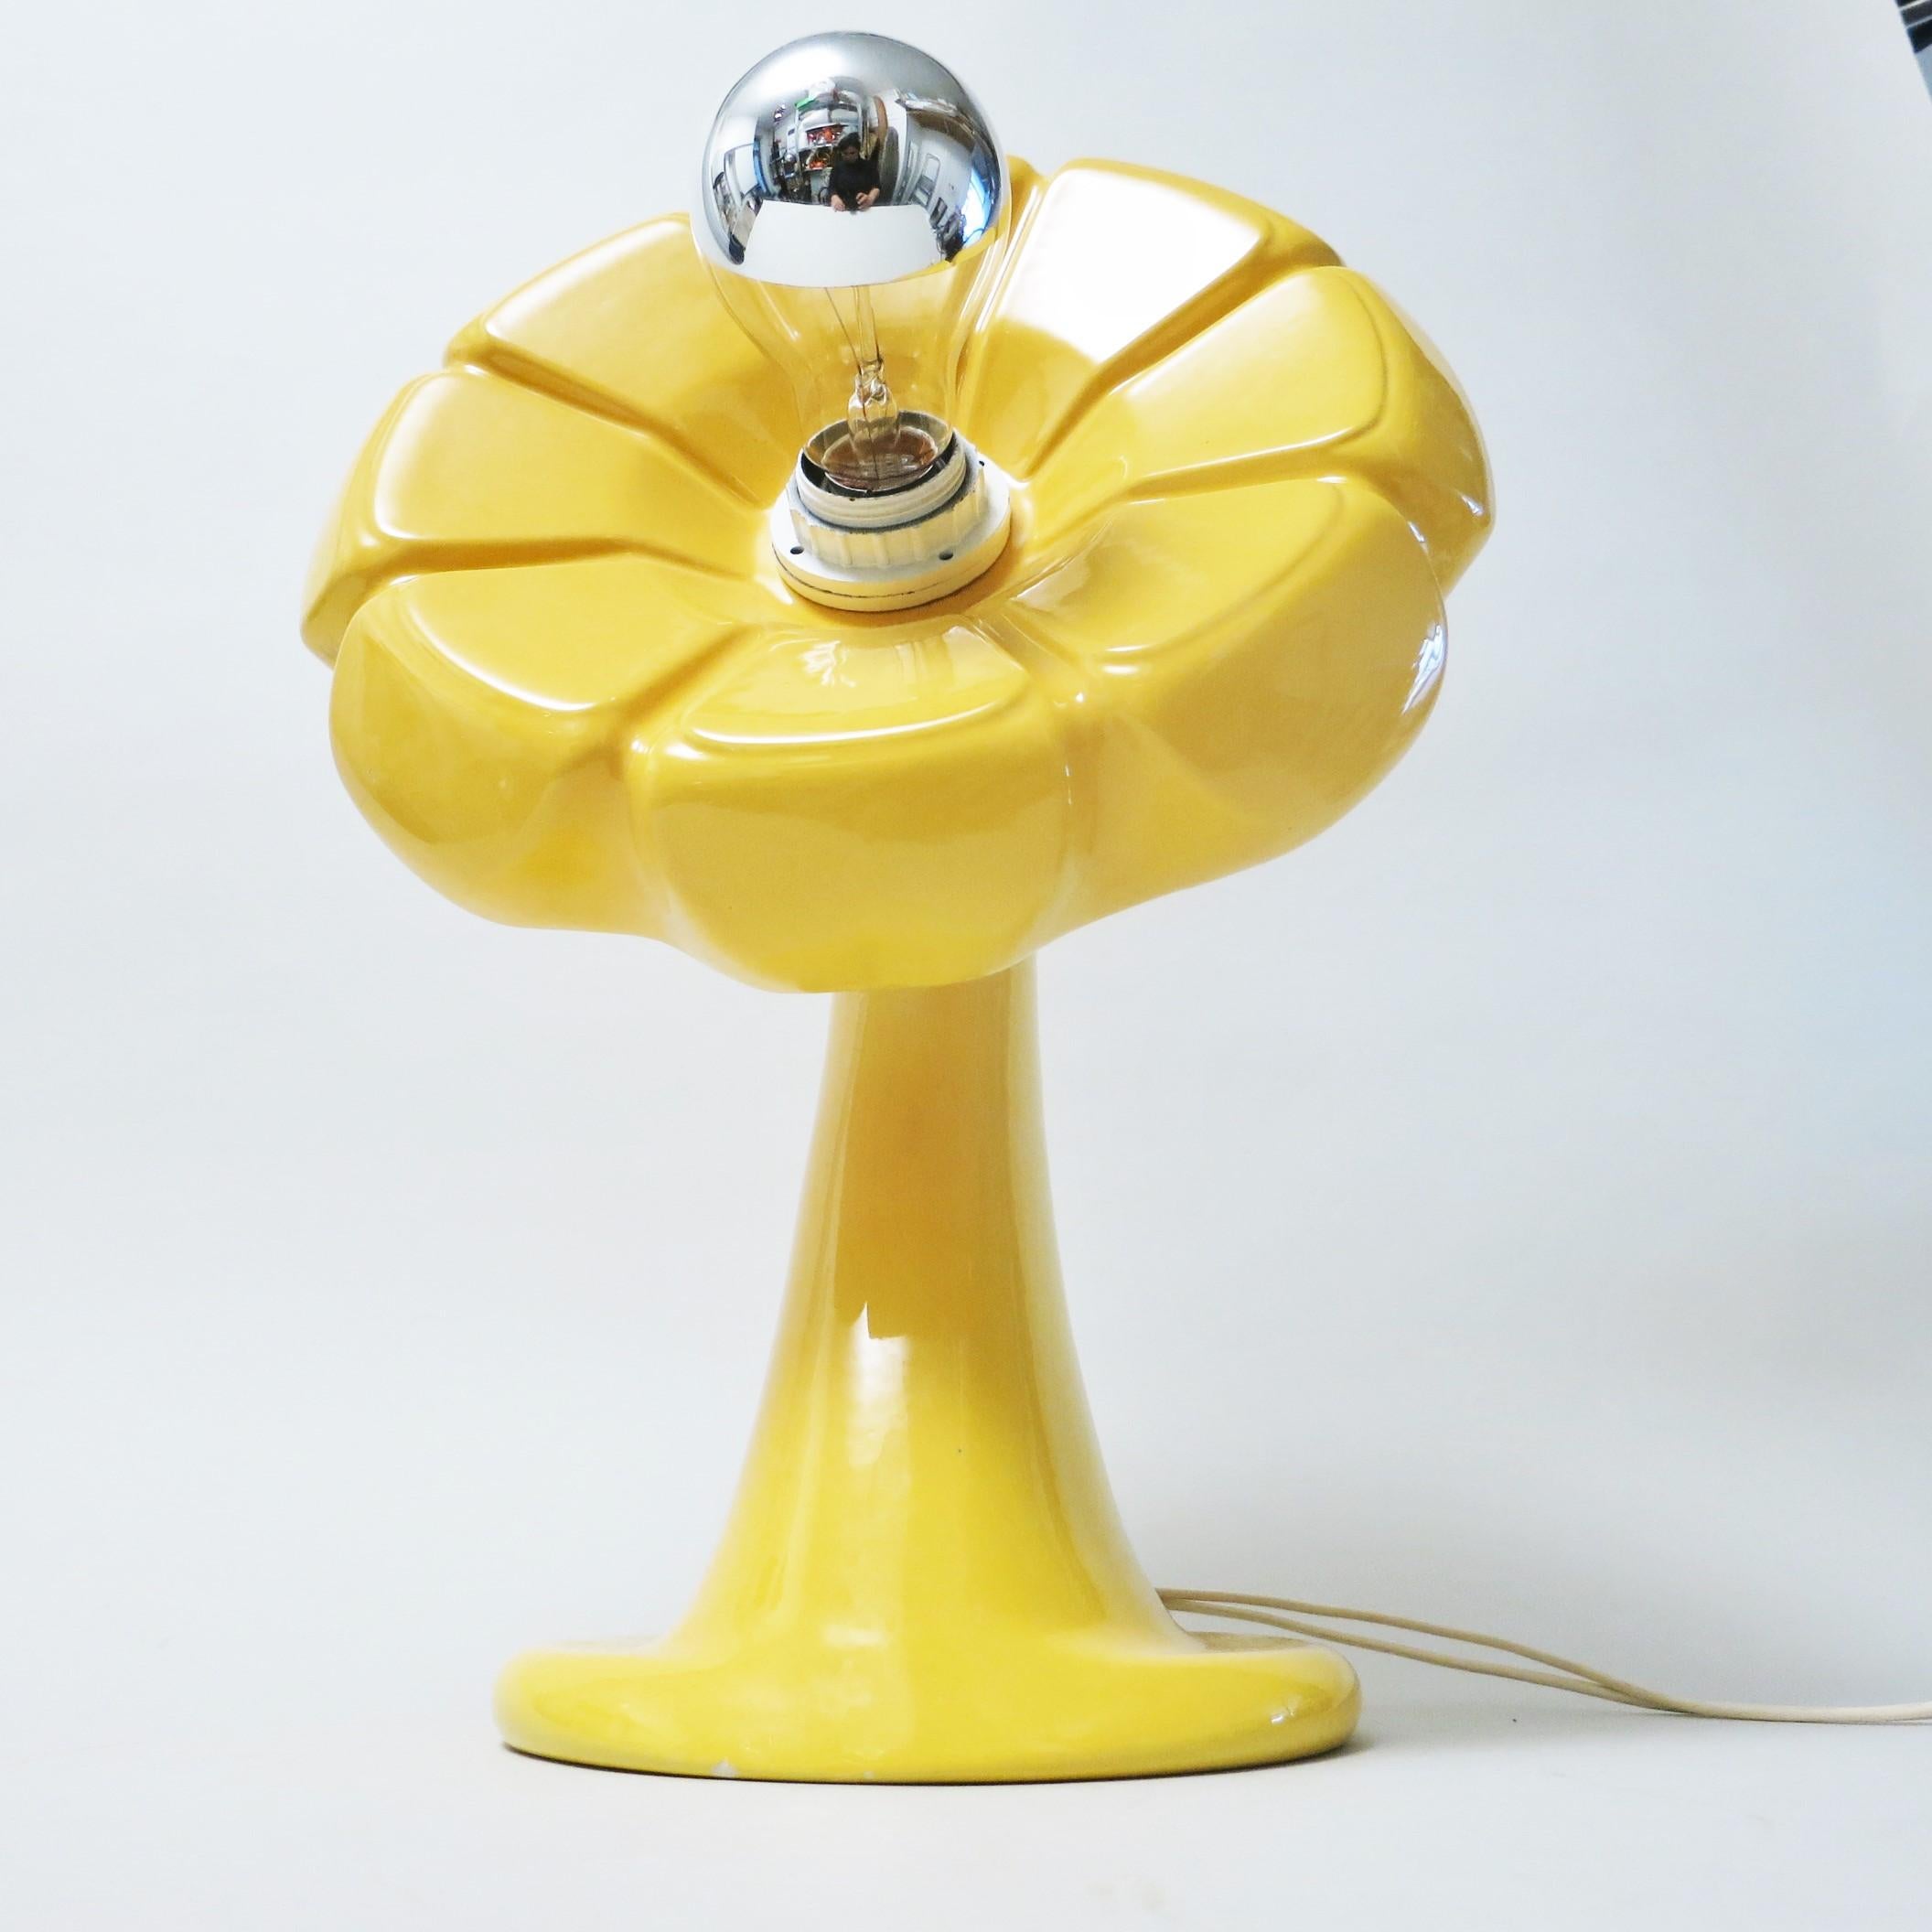 Flower lamp in yellow ceramic designed by Enzo Bioli for Il Picchio Italy in the 1960s.
Signed under the base. In beautiful condition.